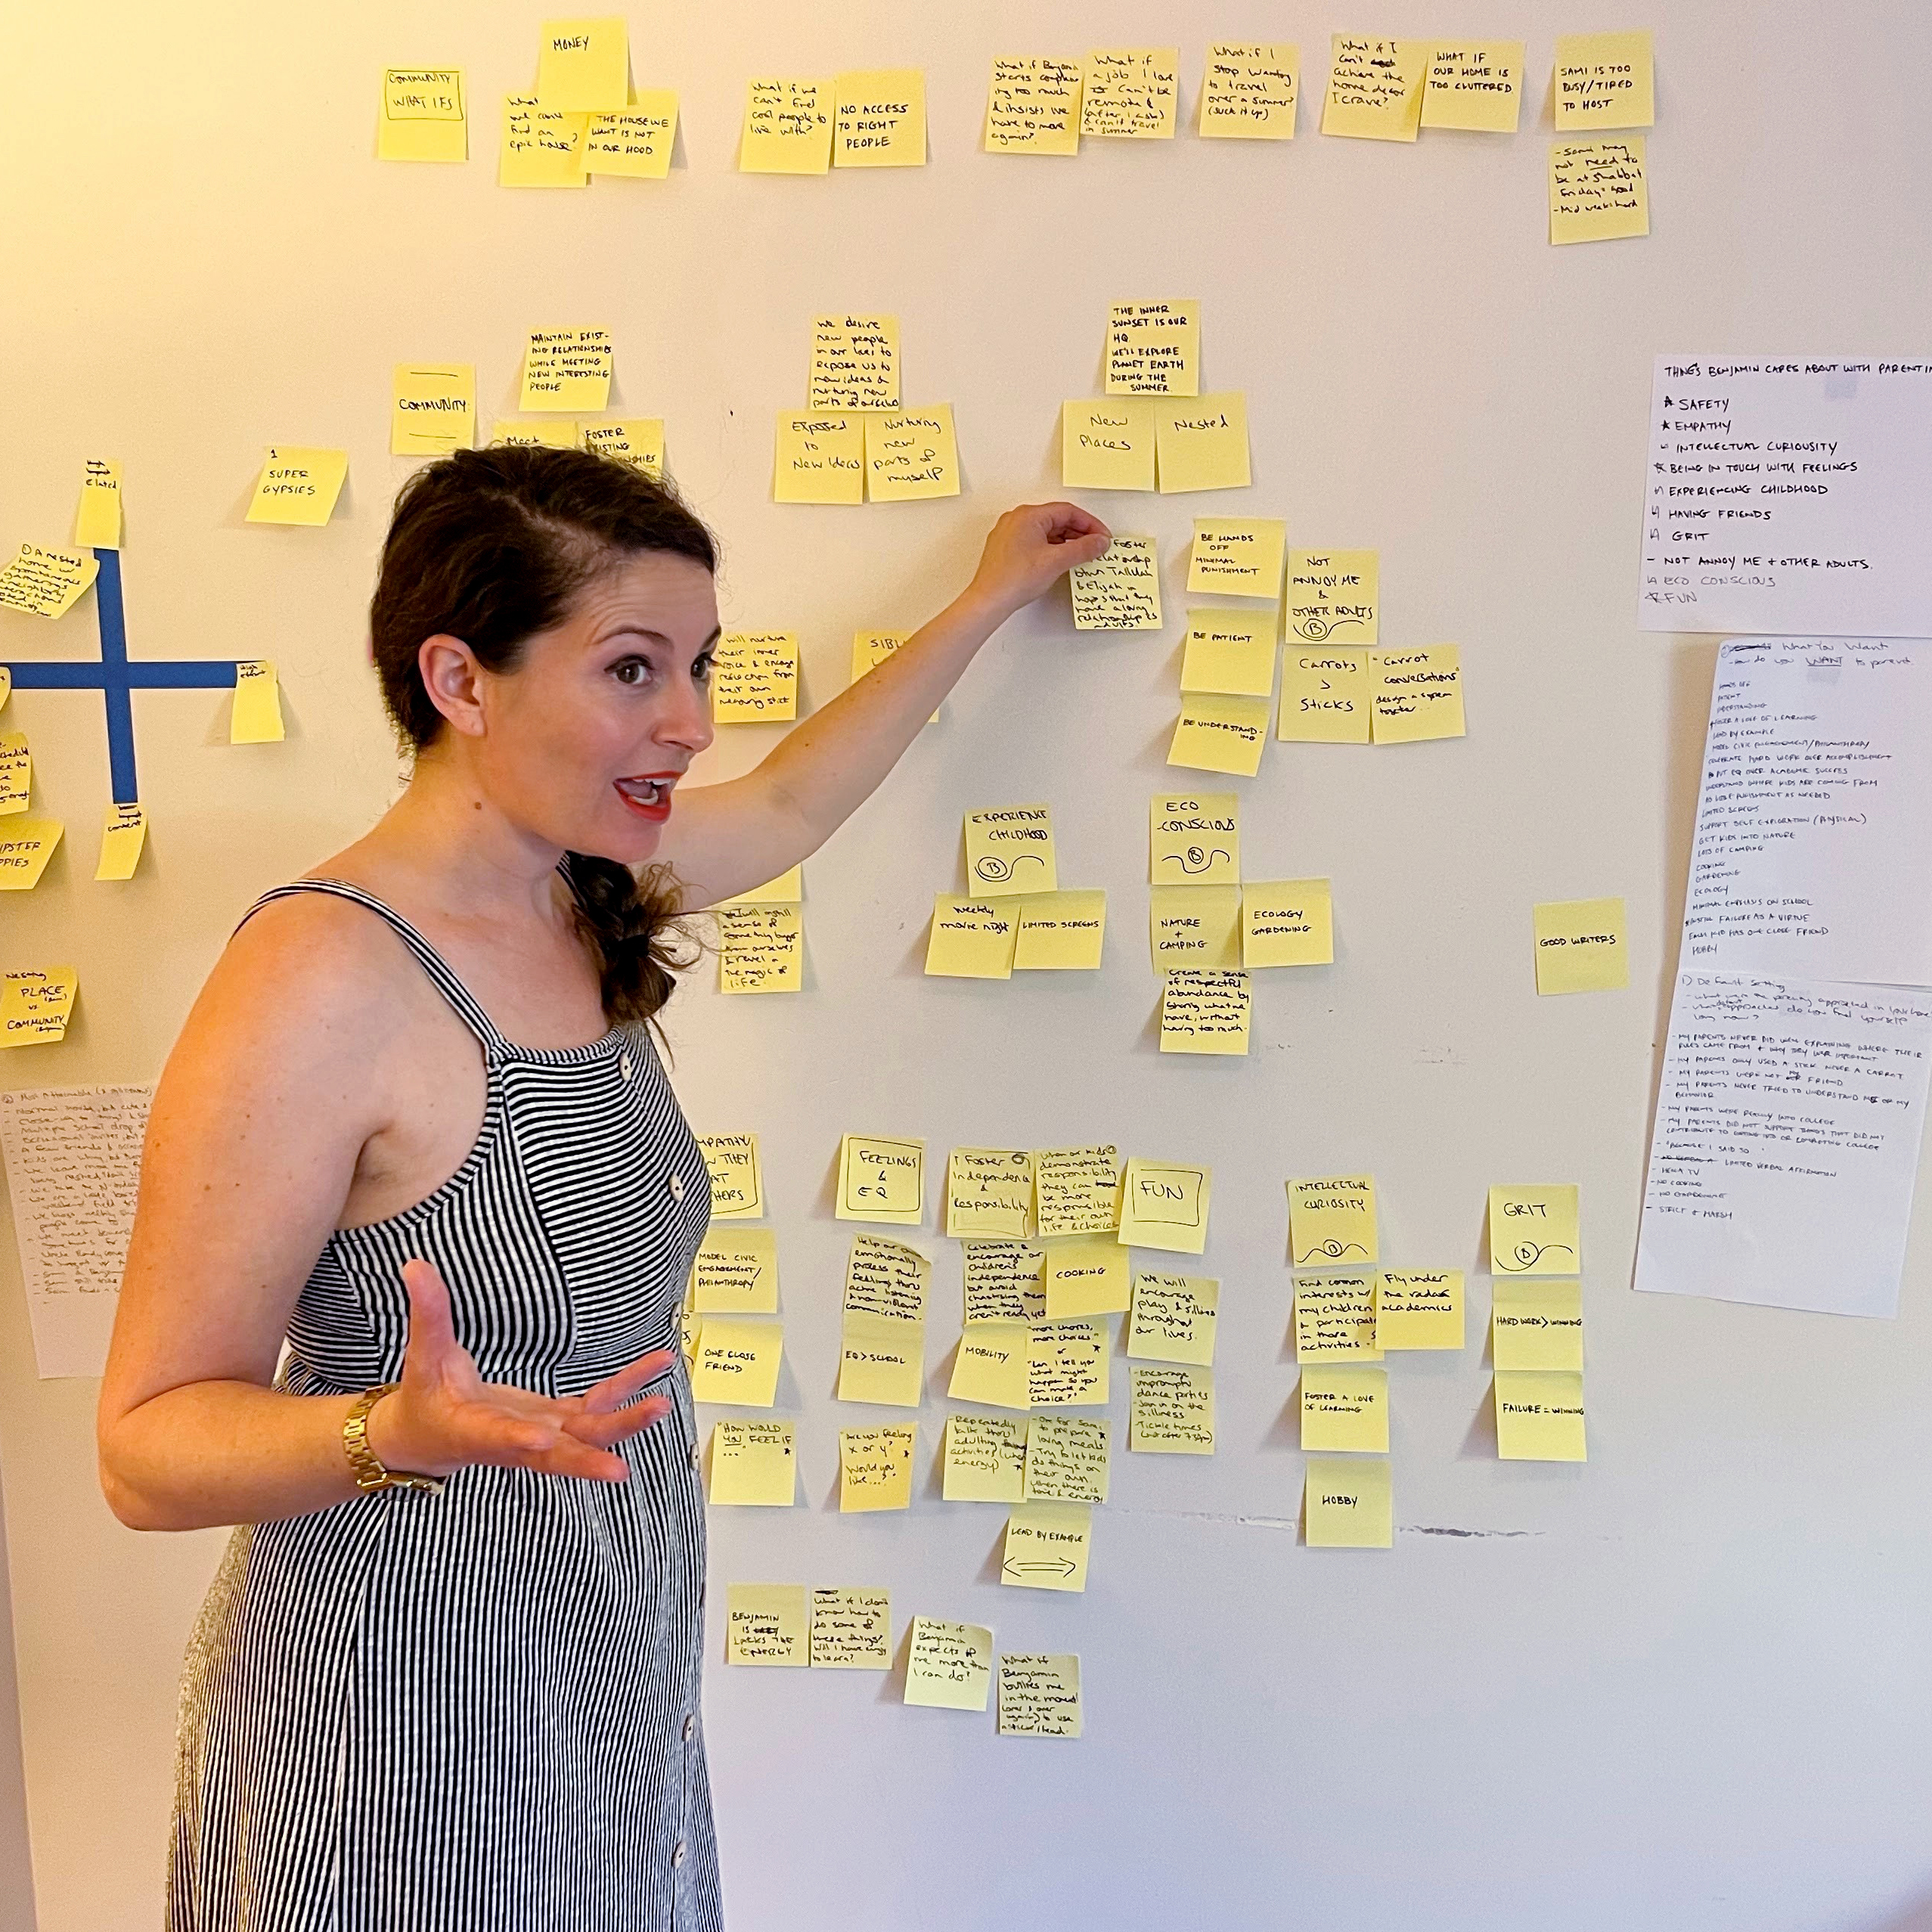 A woman in a striped dress stands beside a wall covered with numerous sticky notes and diagrams, actively pointing and discussing the content with an expressive gesture.